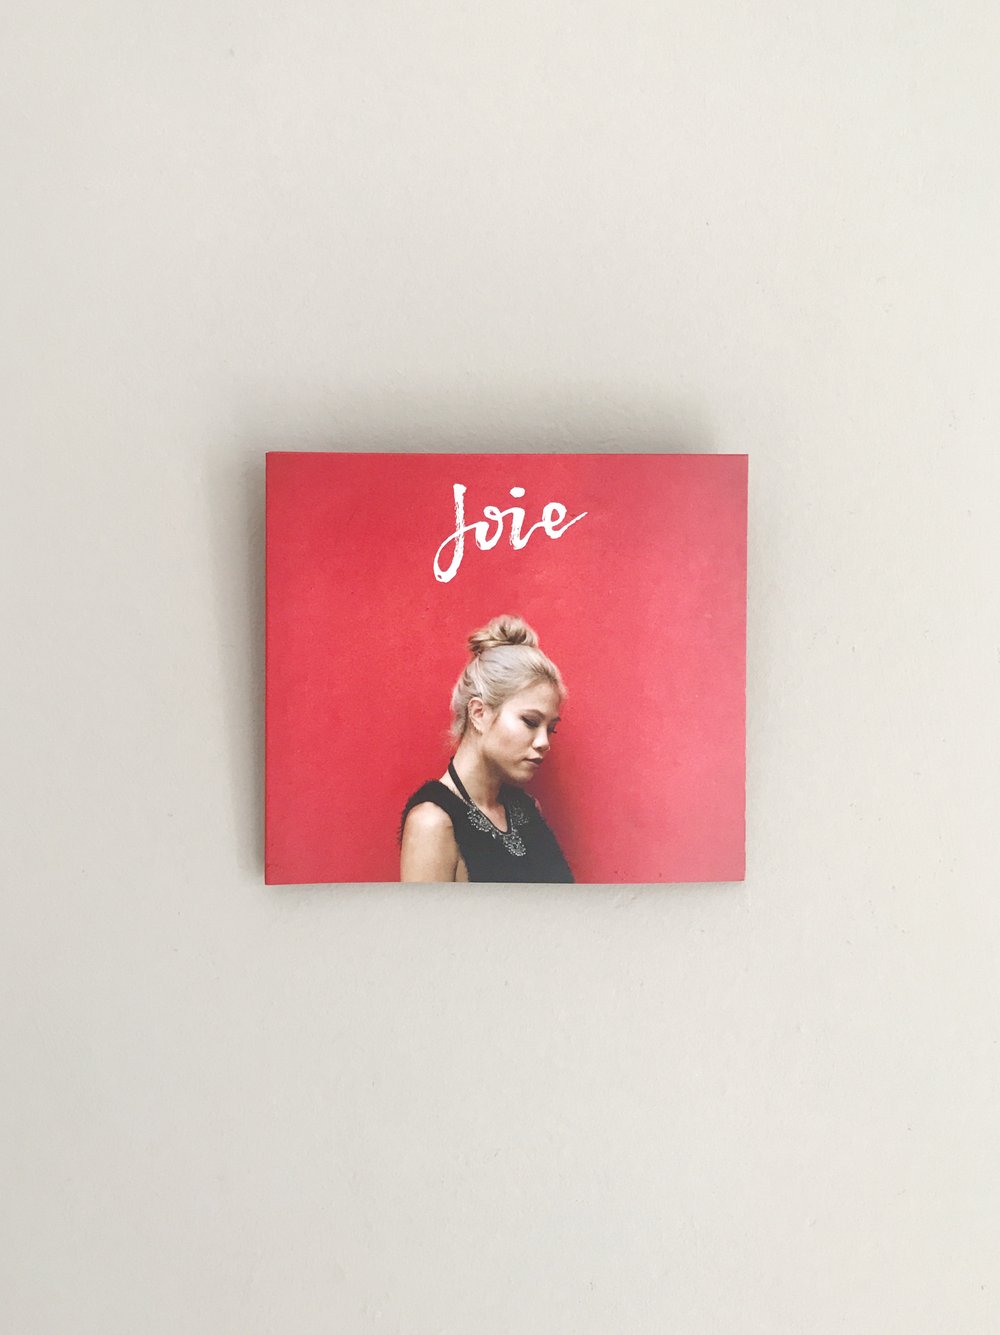 Image of Joie CD